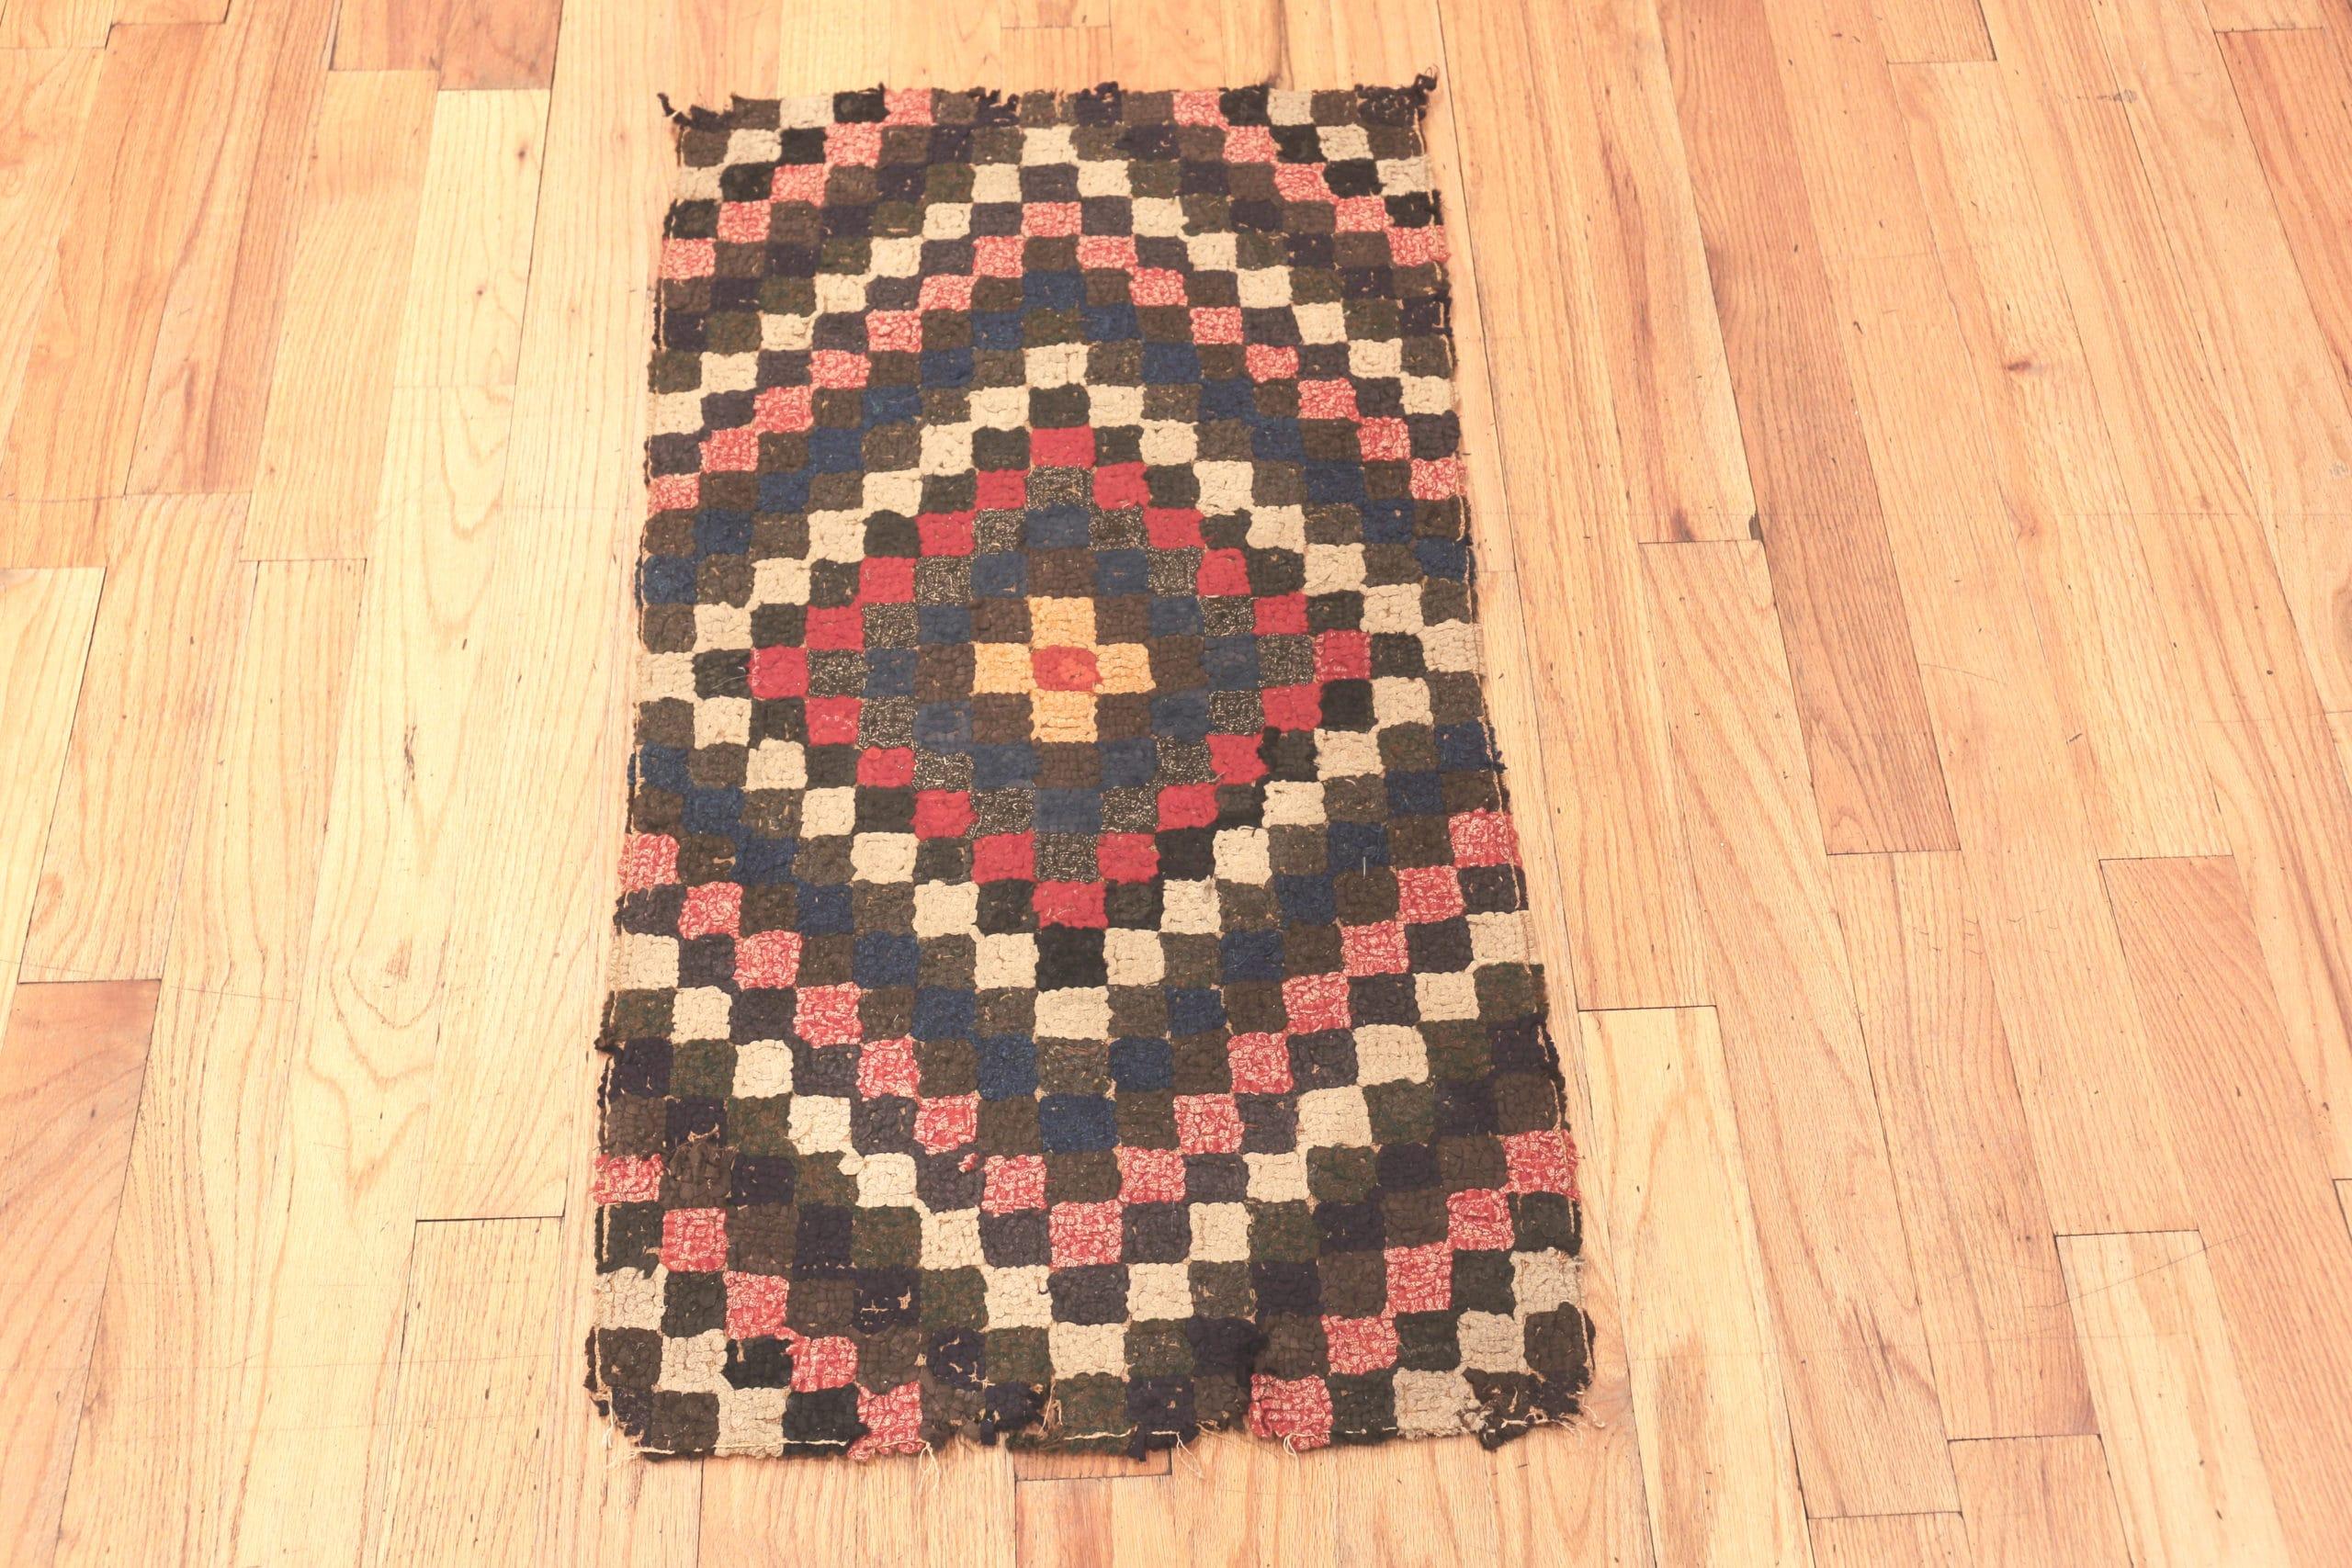 Small Scatter Size Bold Geometric Pattern Antique American Hooked Rug, country of origin: American, Circa date: Antique 